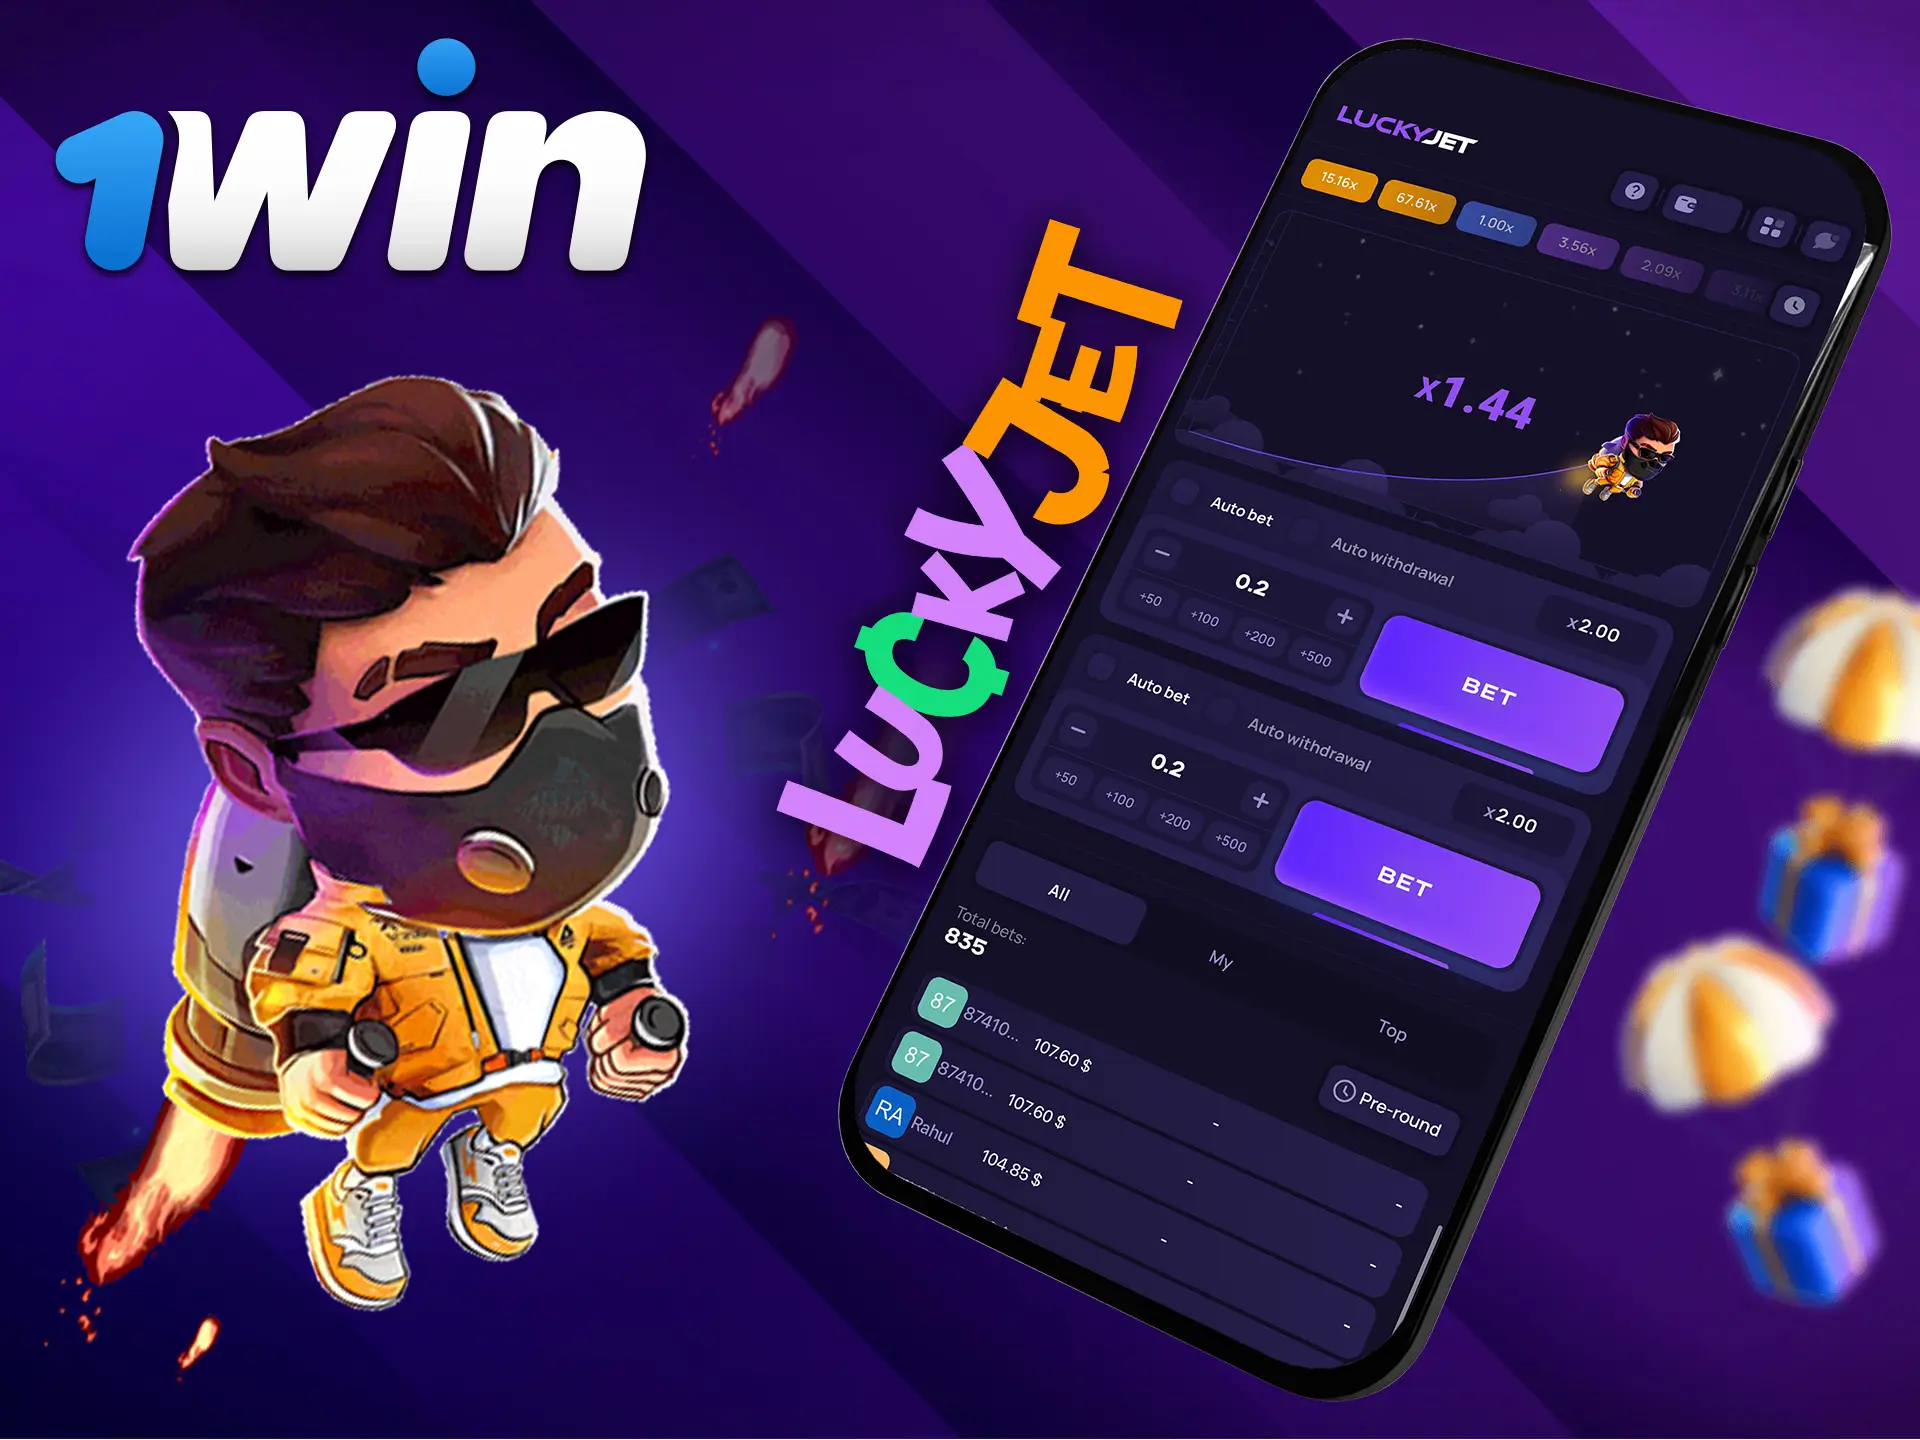 Download the 1Win Lucky Jet mobile app for Android and iOS from the official website.